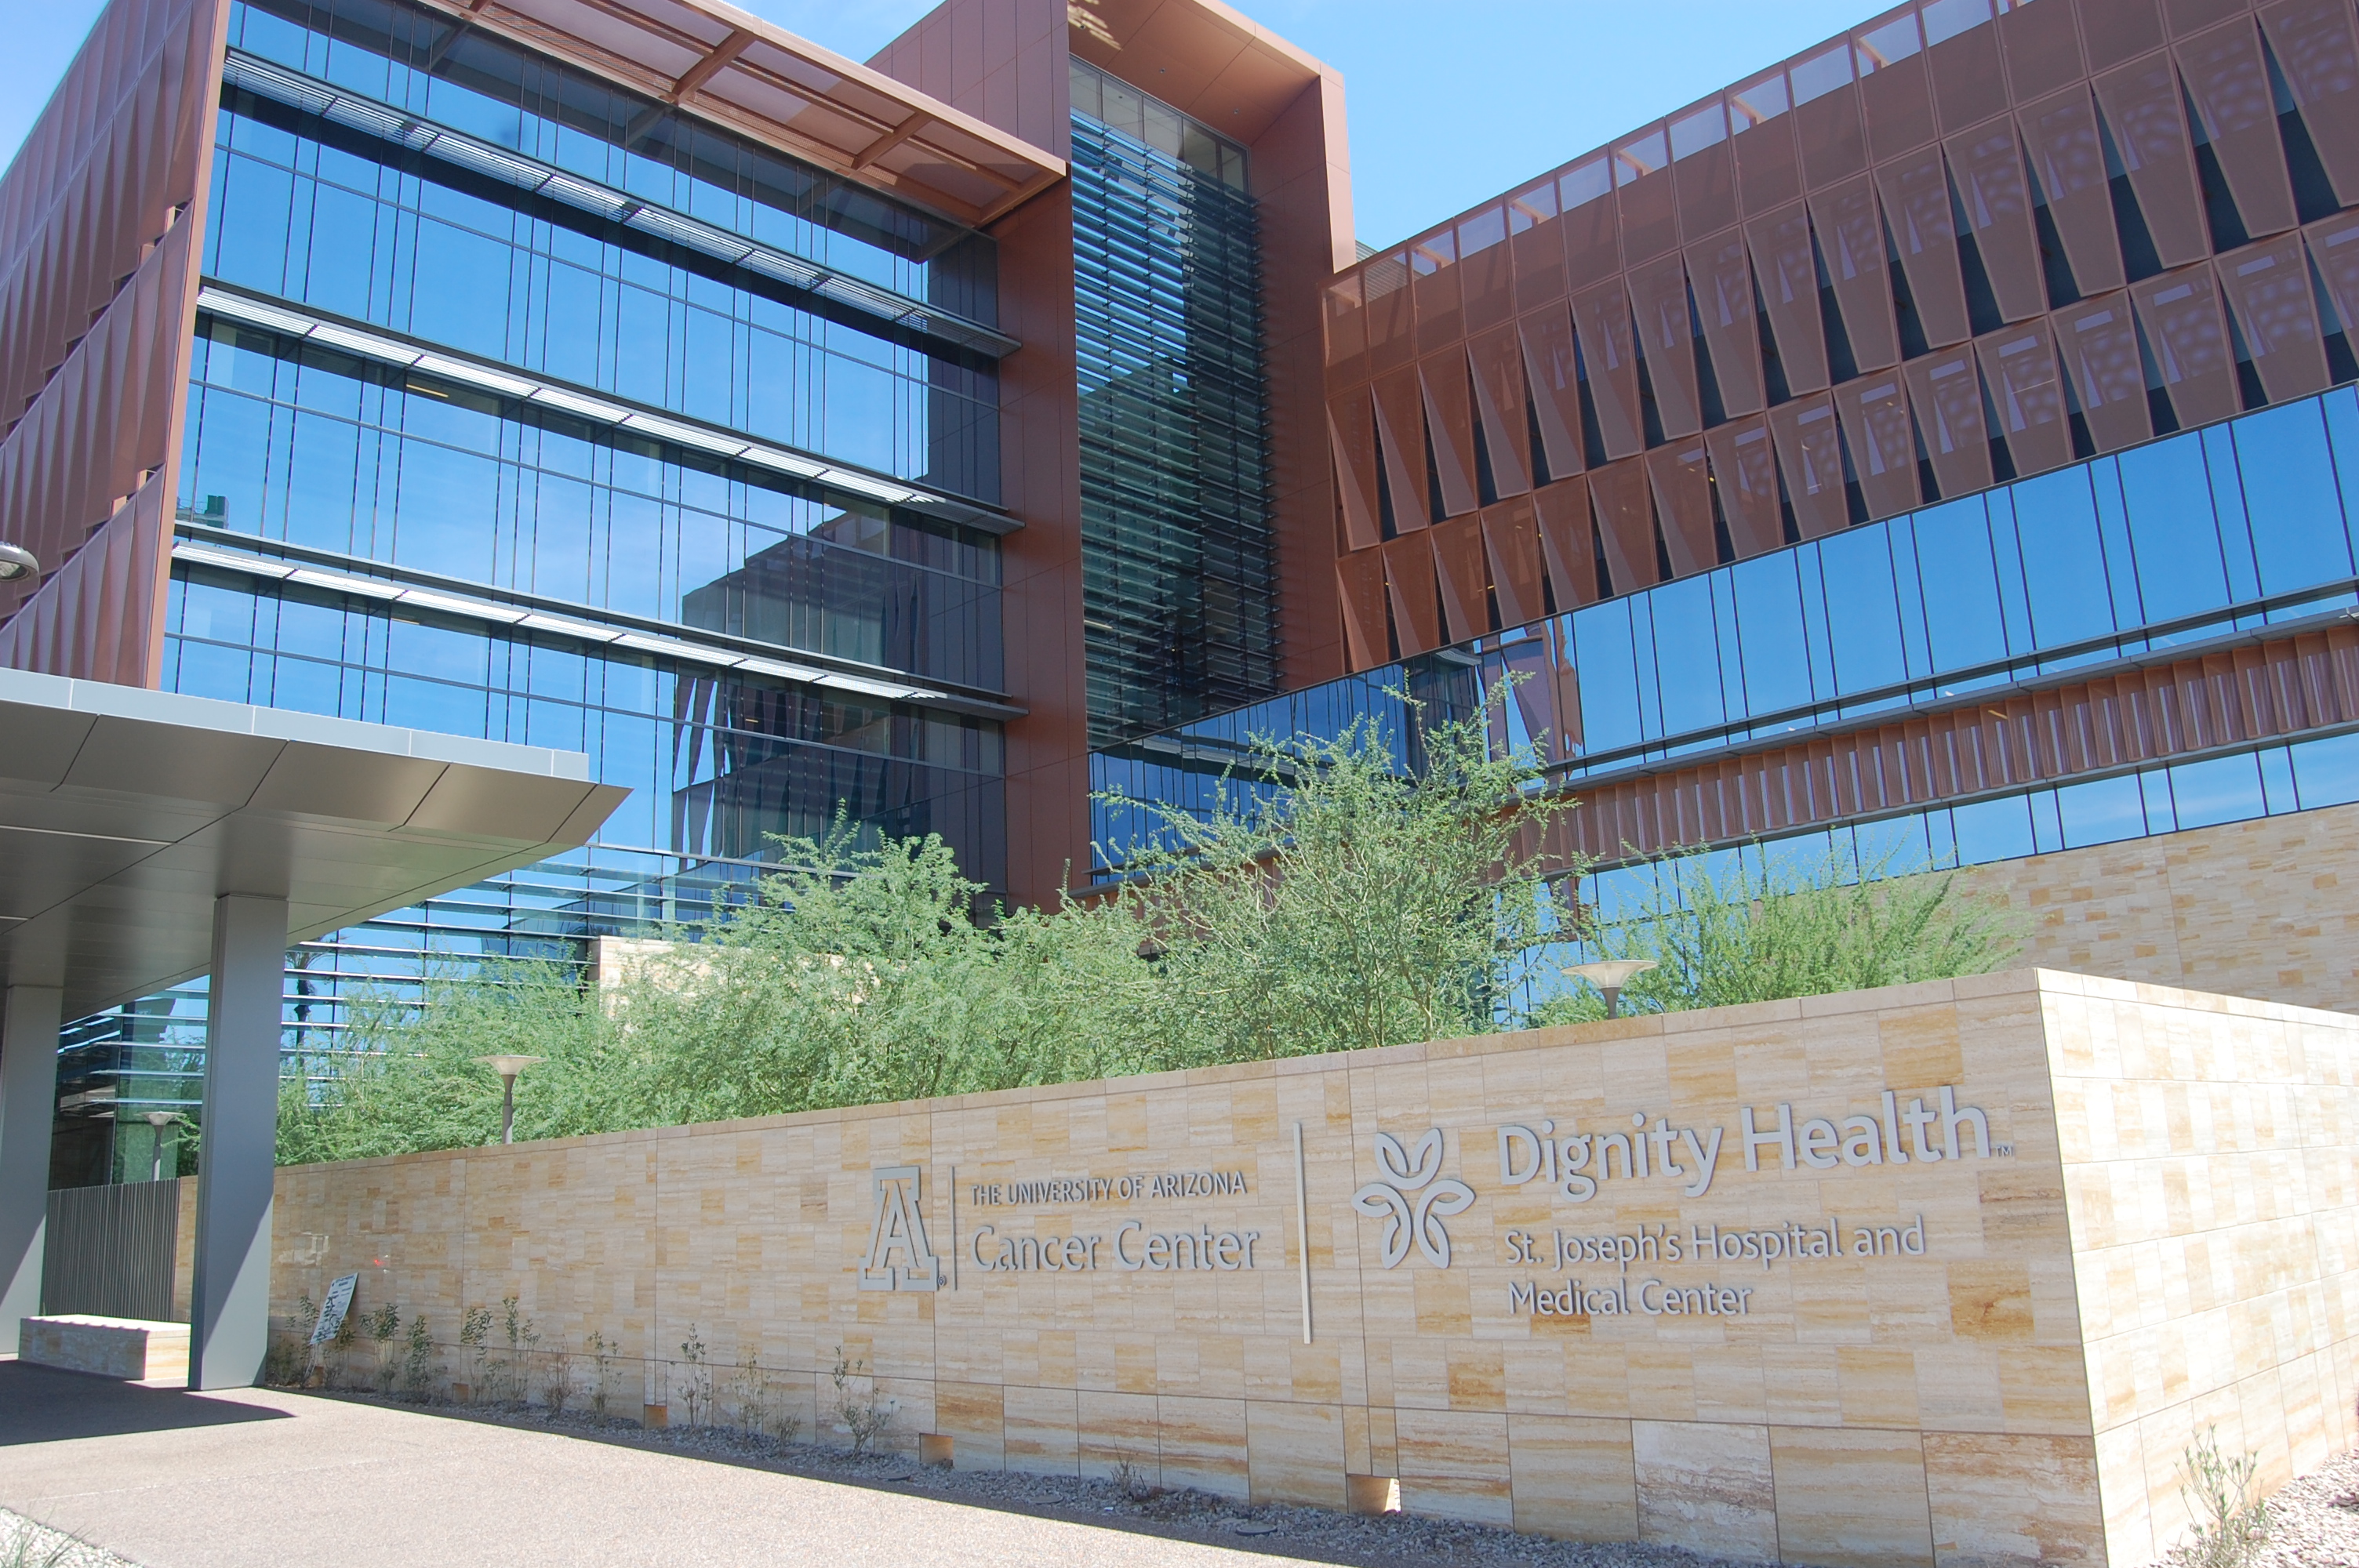 UArizona Cancer Center at Dignity Health St. Joseph's Hospital and Medical Center in Phoenix